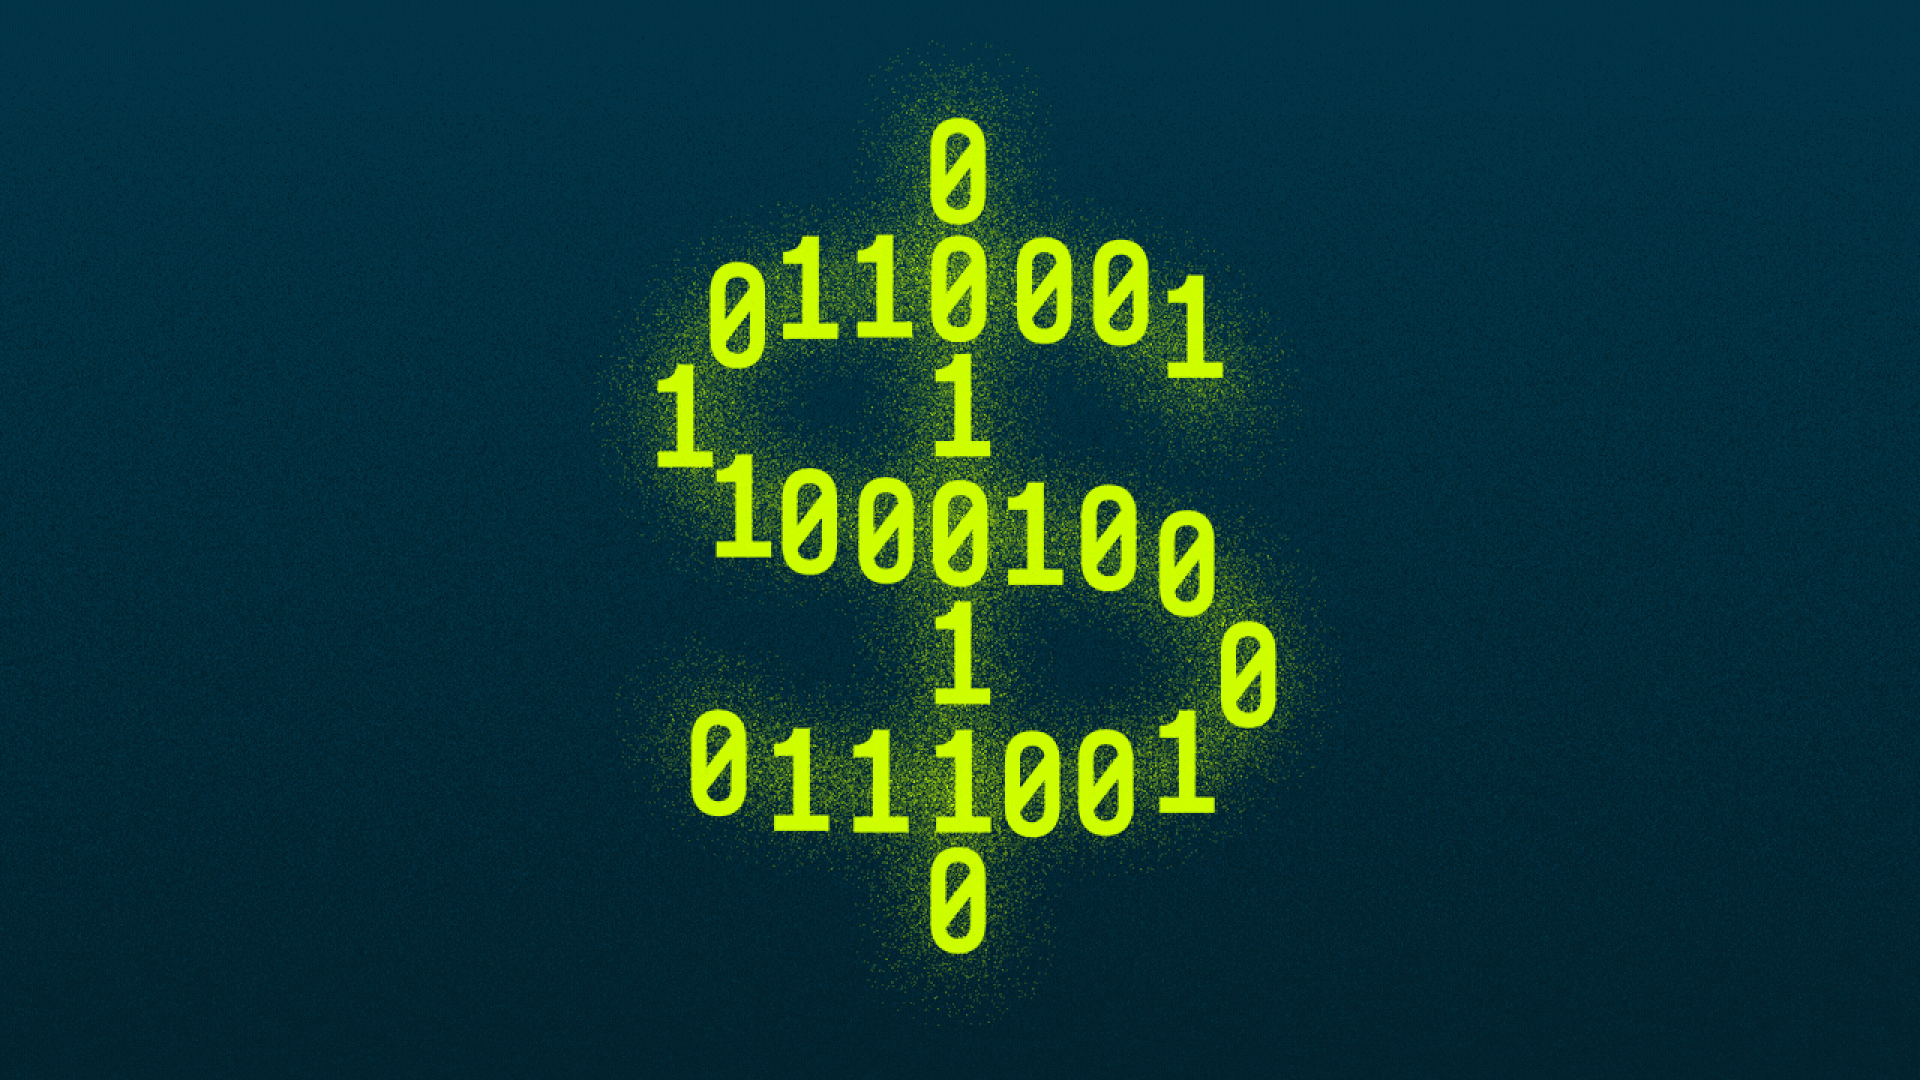 An example of a dollar sign made of binary code becoming a checkmark made of binary code.